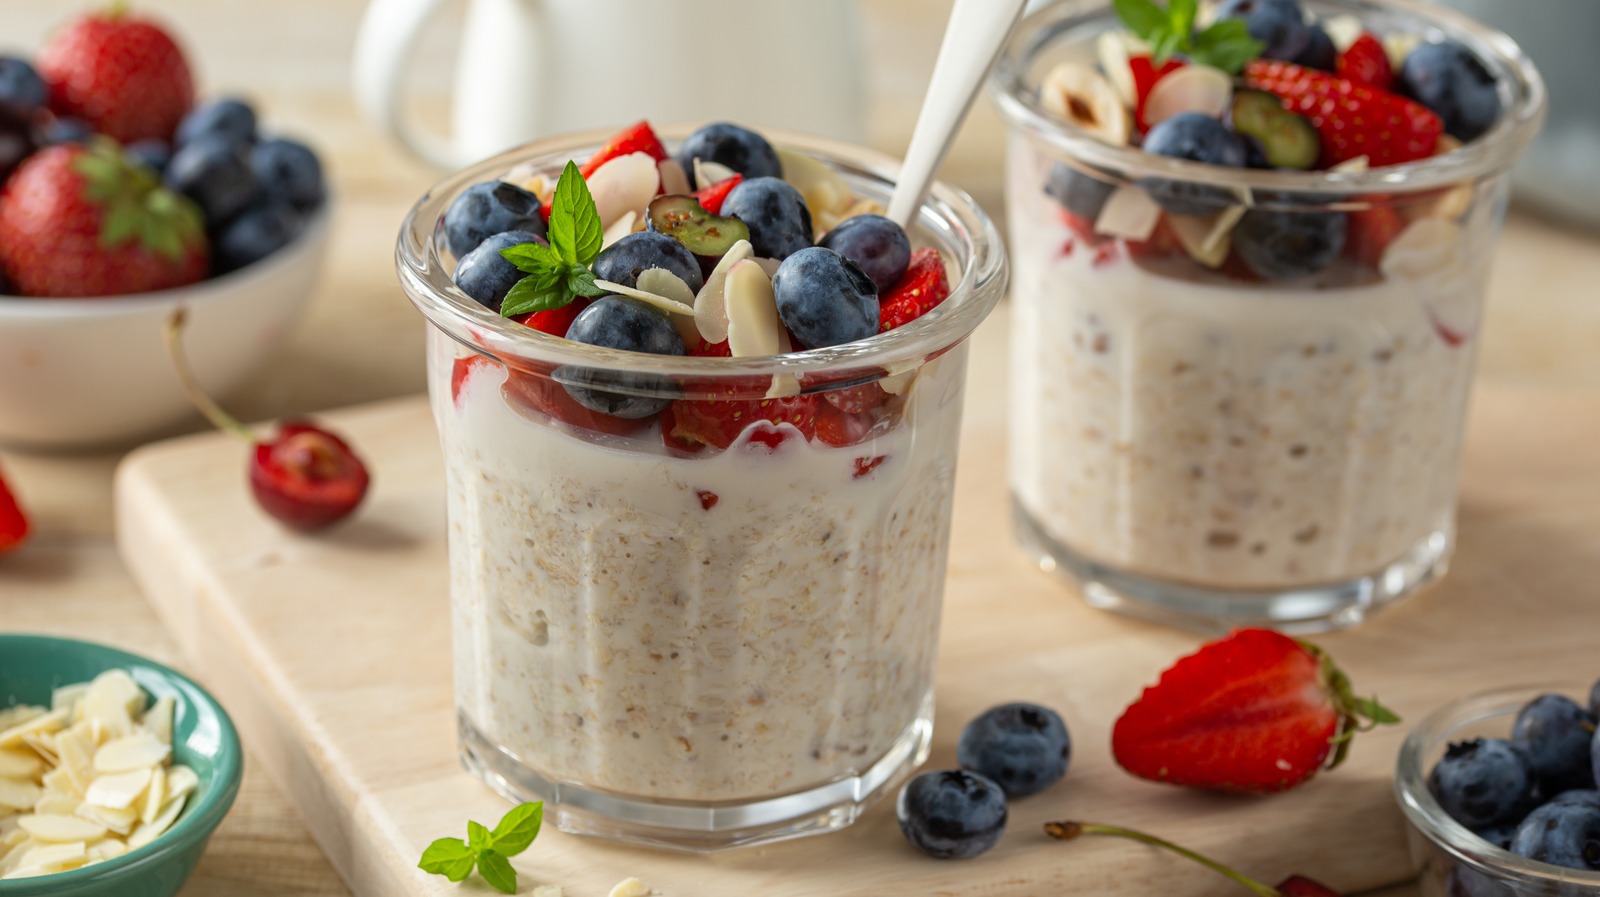 Can You Heat Up Overnight Oats?